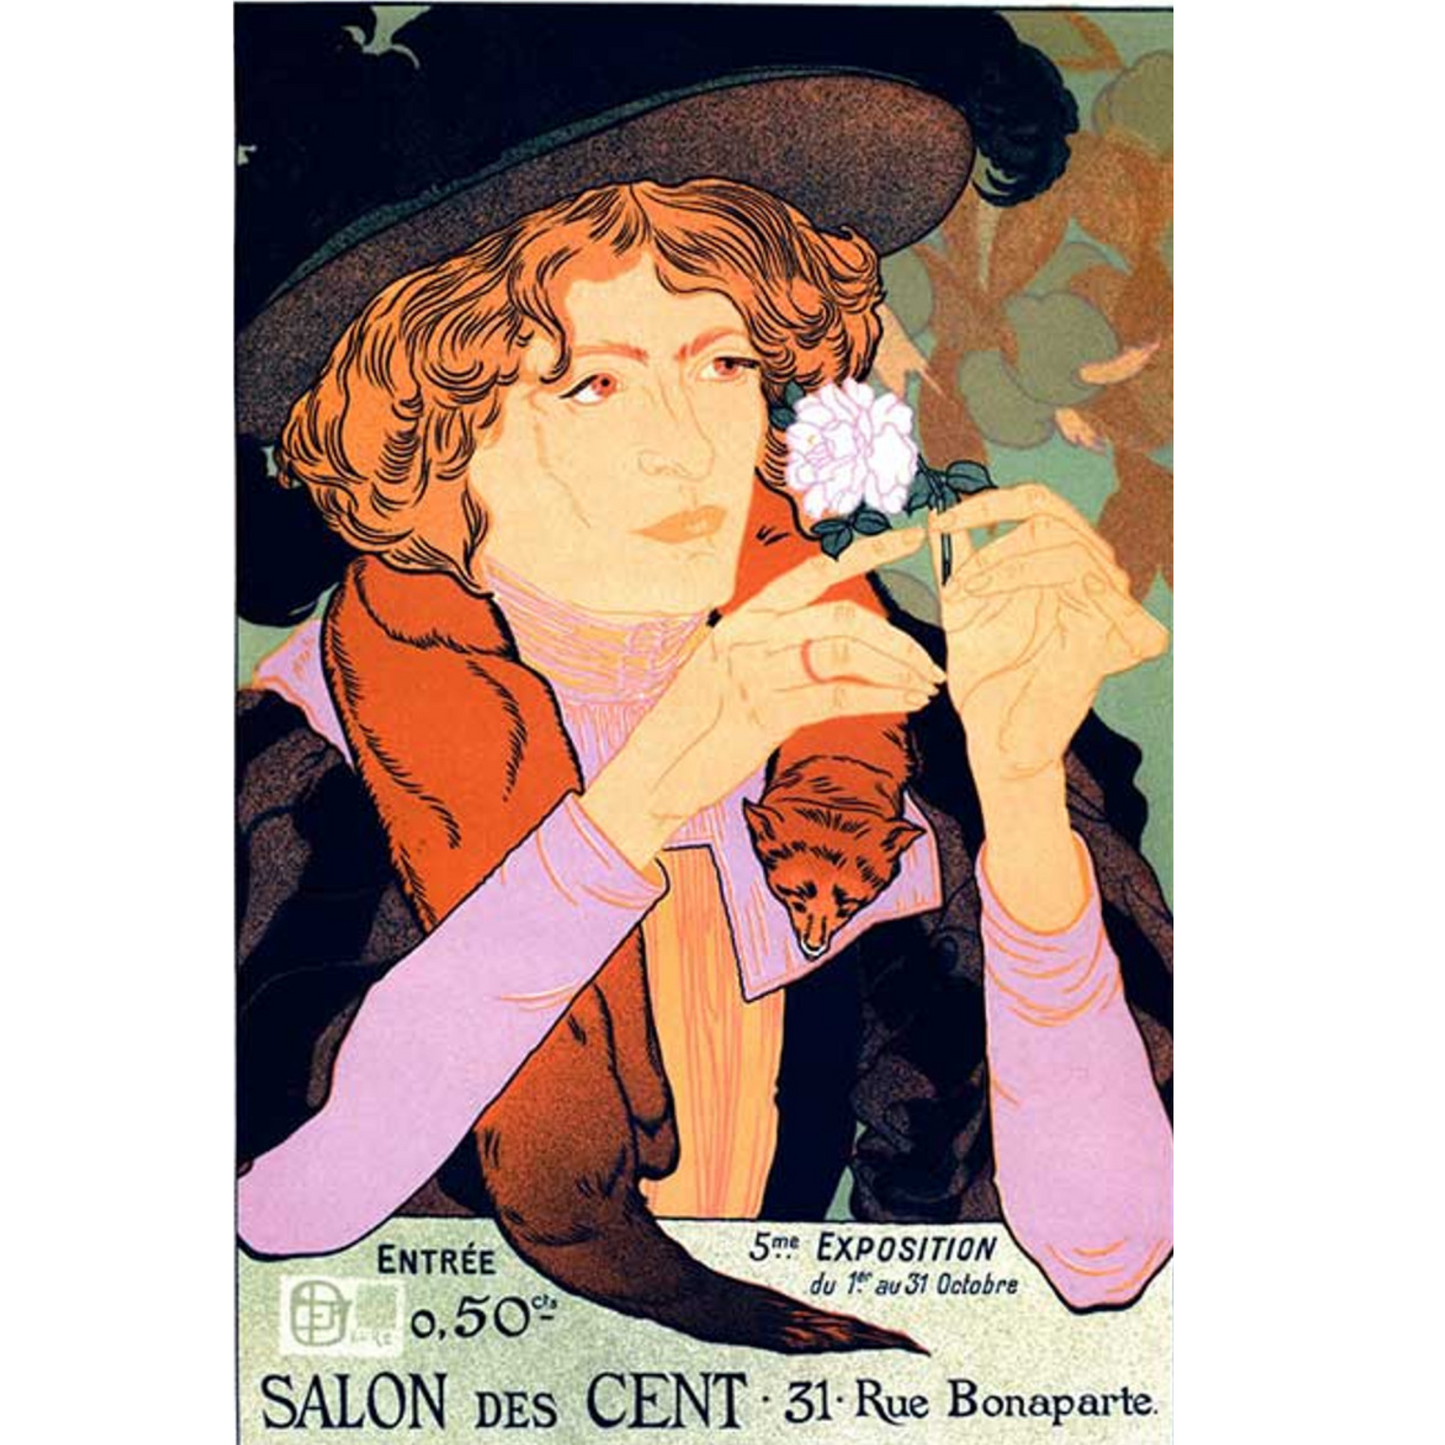 "Salon Des Cent Exposition-Poster" decoupage rice paper by Paper Designs. Size A4 available at Milton's Daughter.